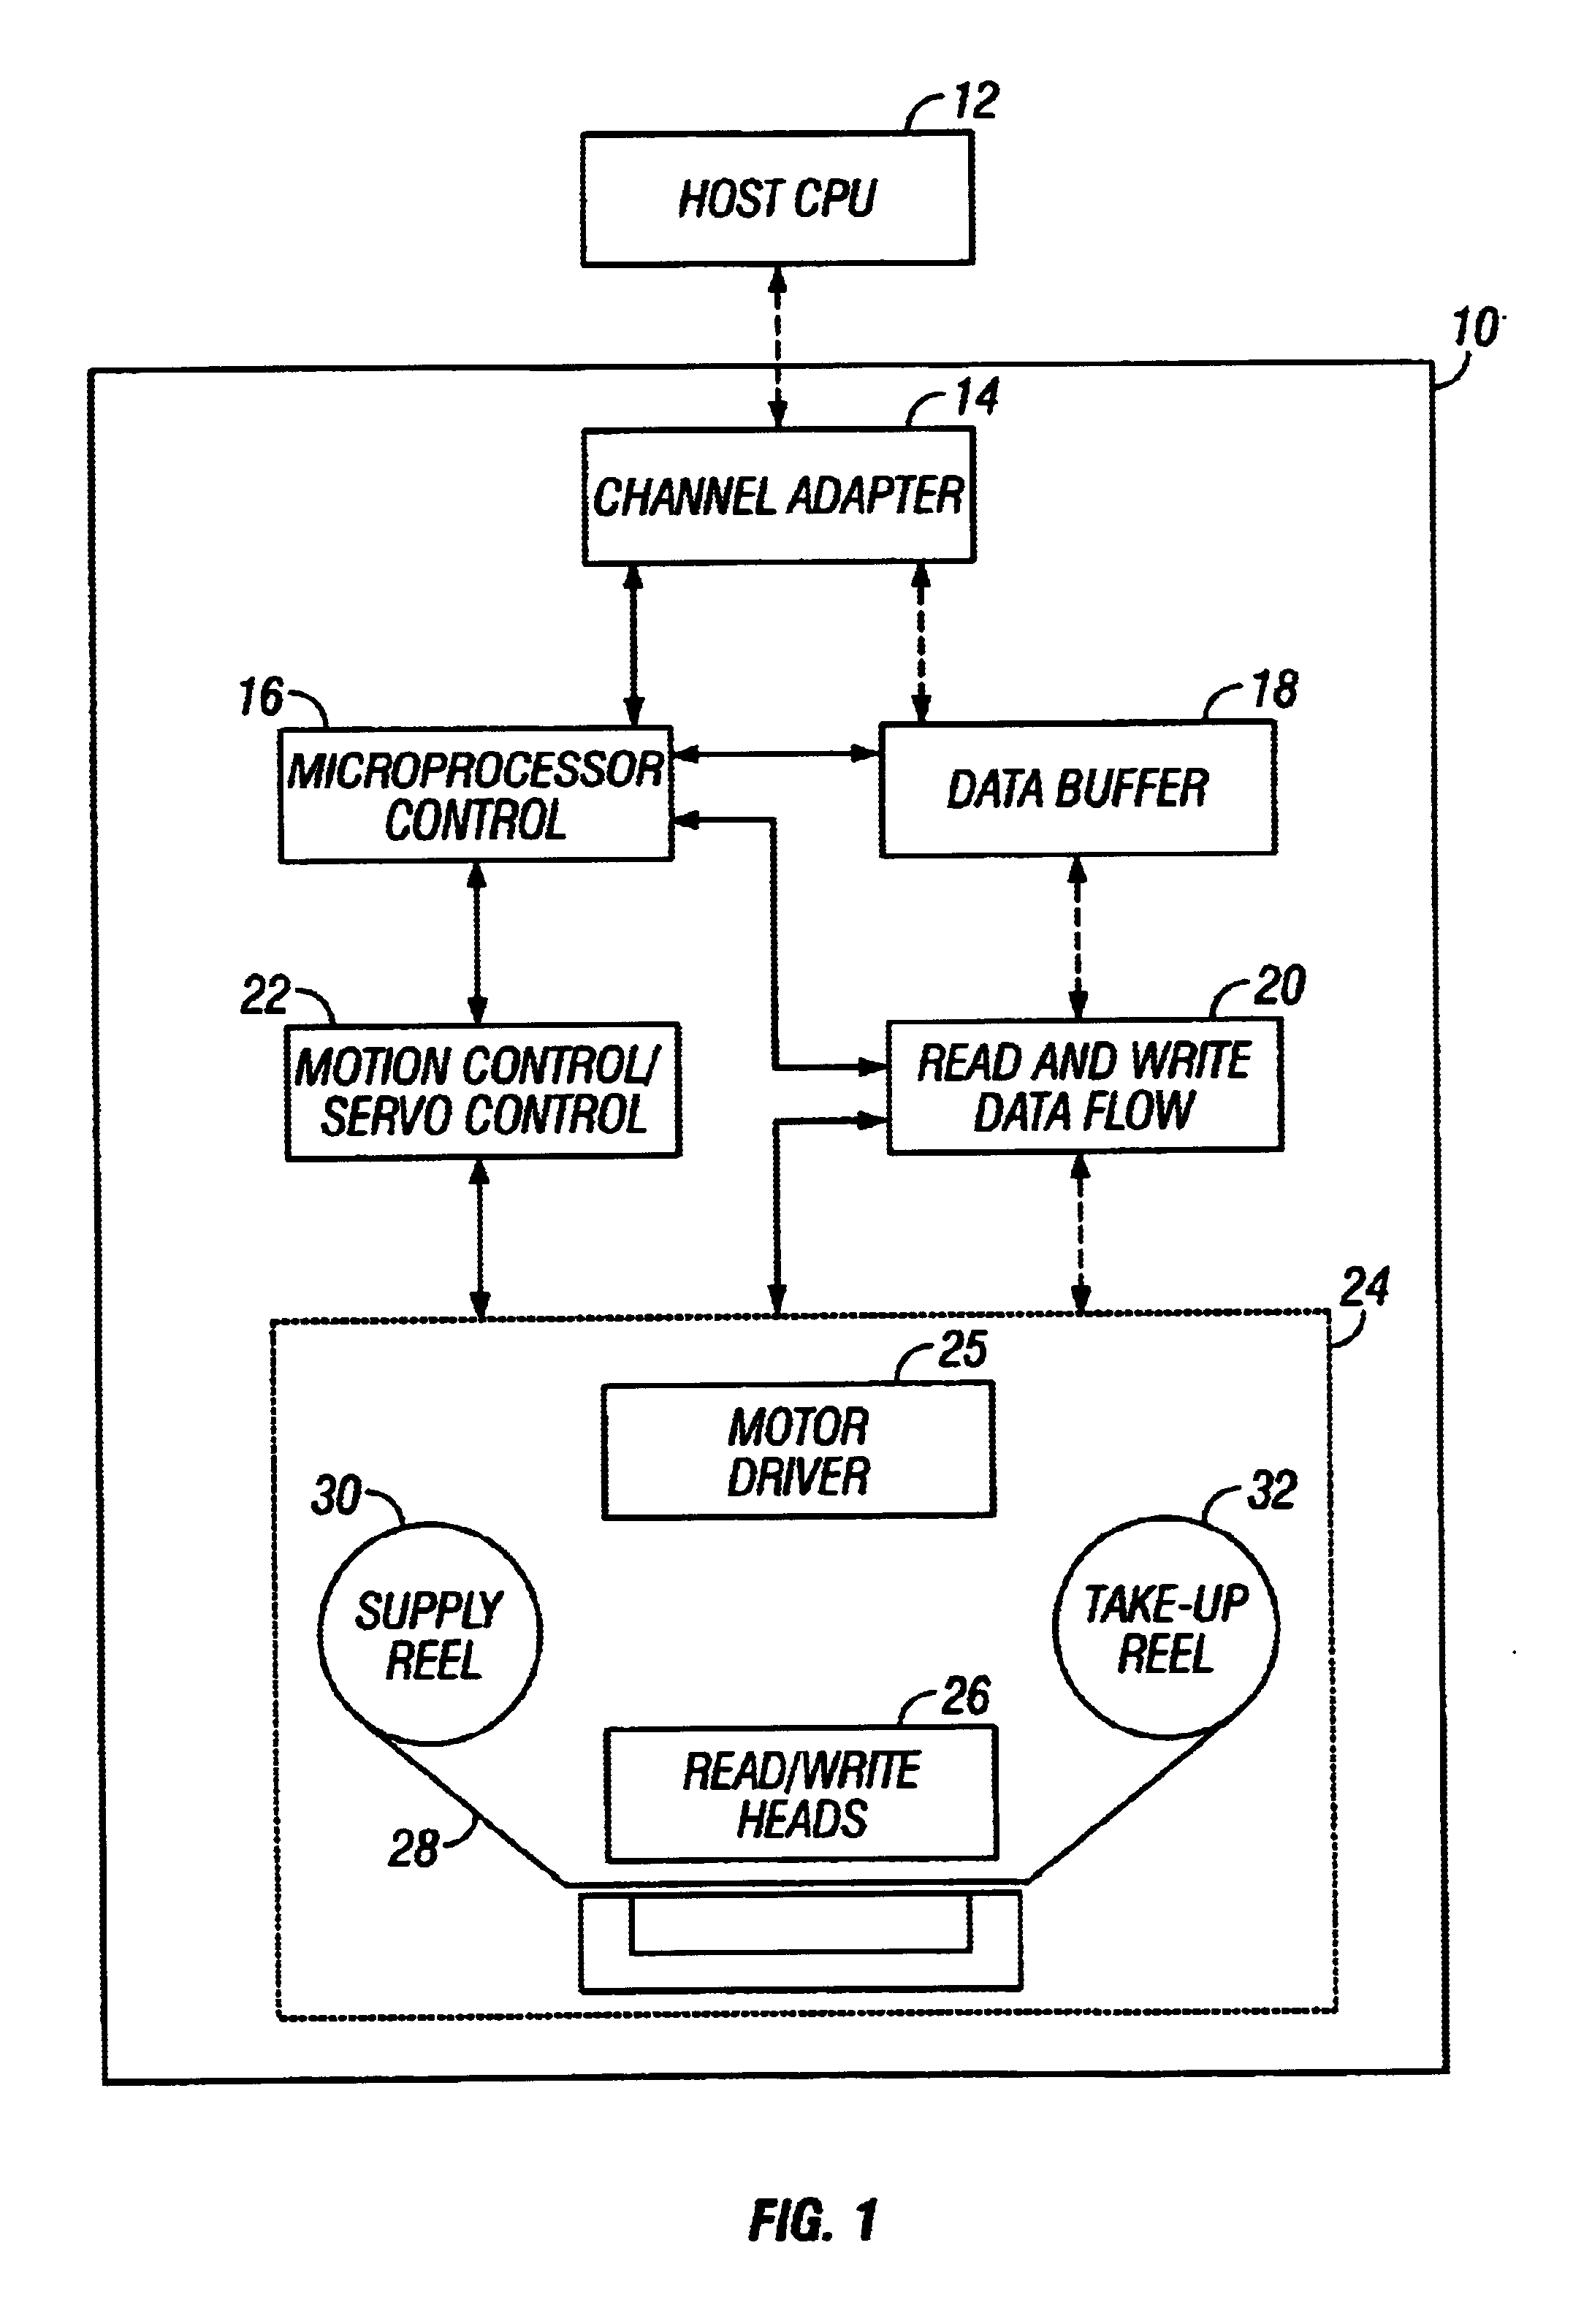 Servo pattern based tape tension control for tape drives